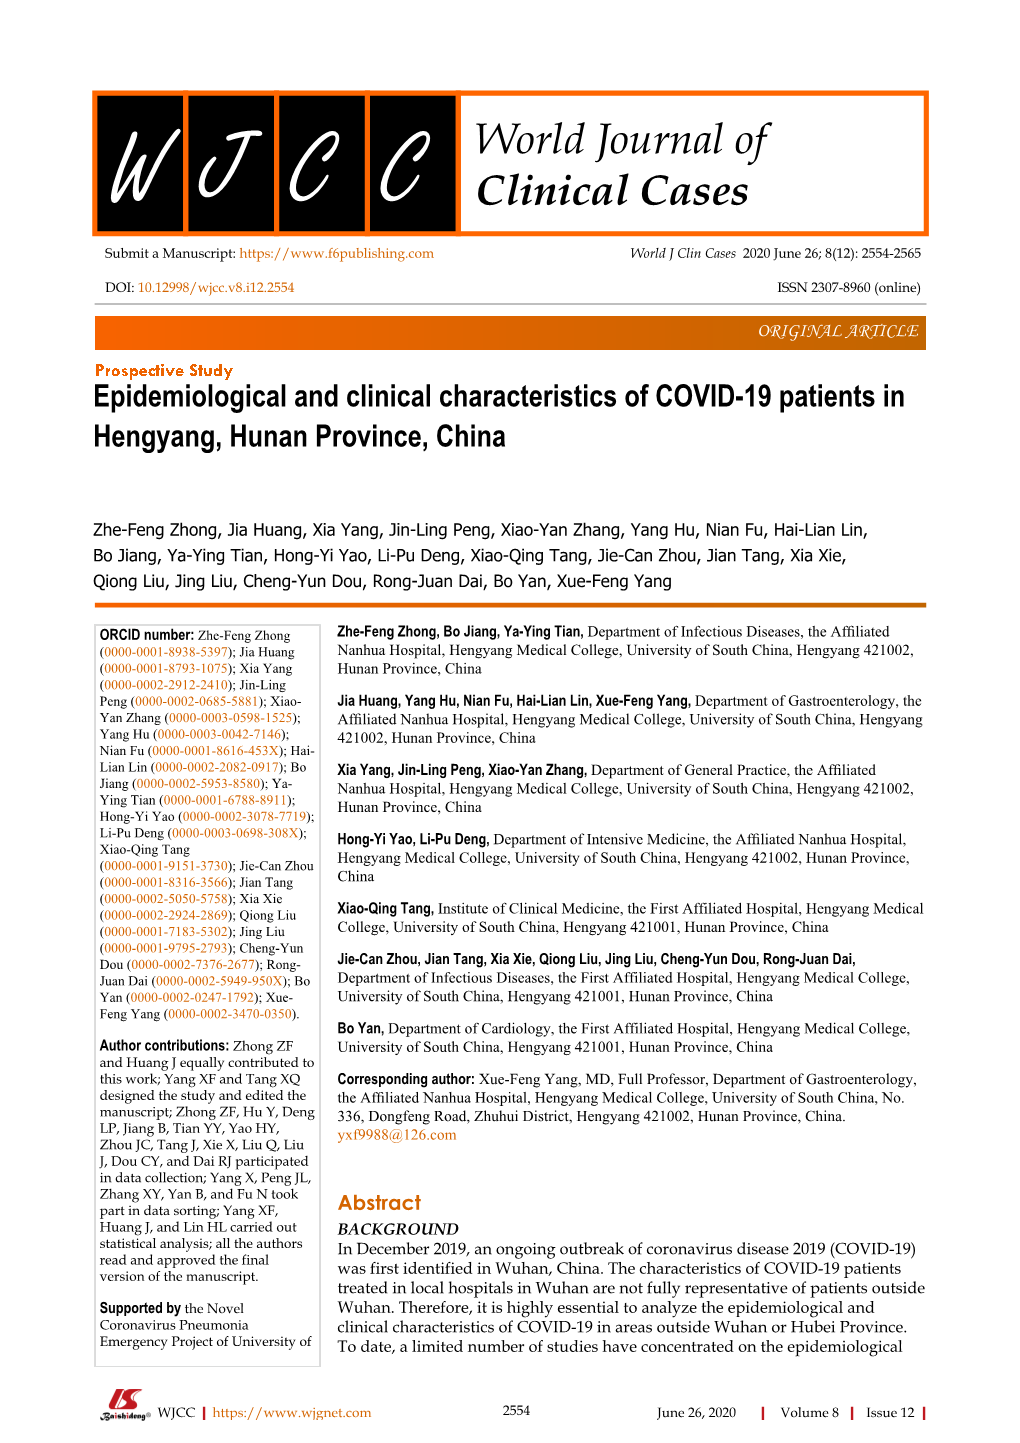 Epidemiological and Clinical Characteristics of COVID-19 Patients in Hengyang, Hunan Province, China